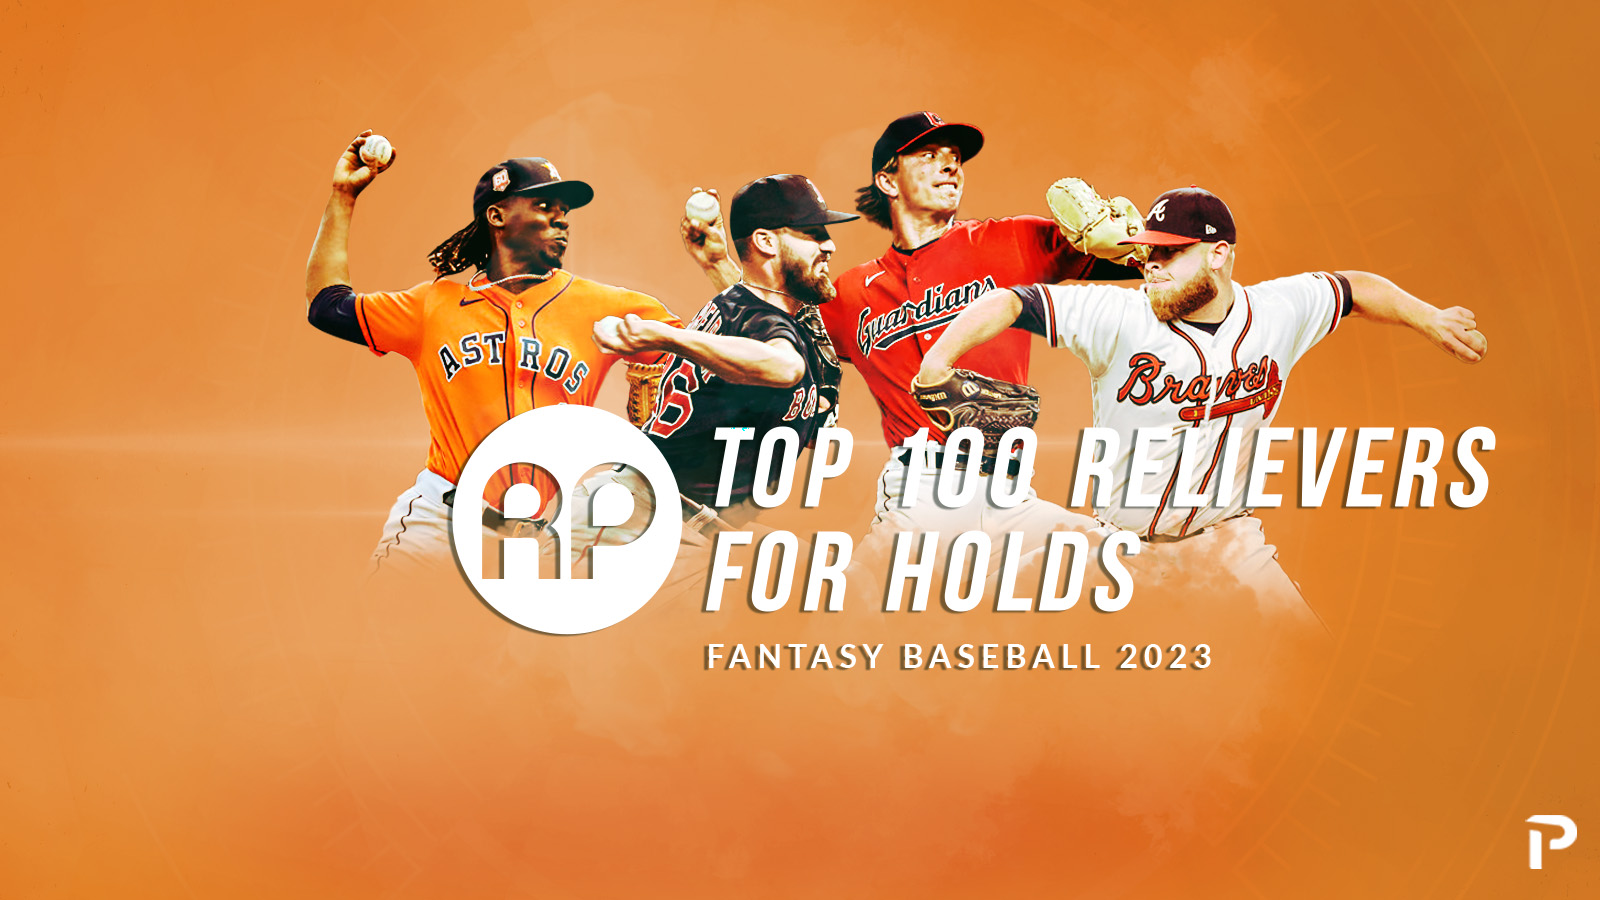 The Hold Up 5/5: Ranking the Top 100 Relievers for Holds Every Thursday